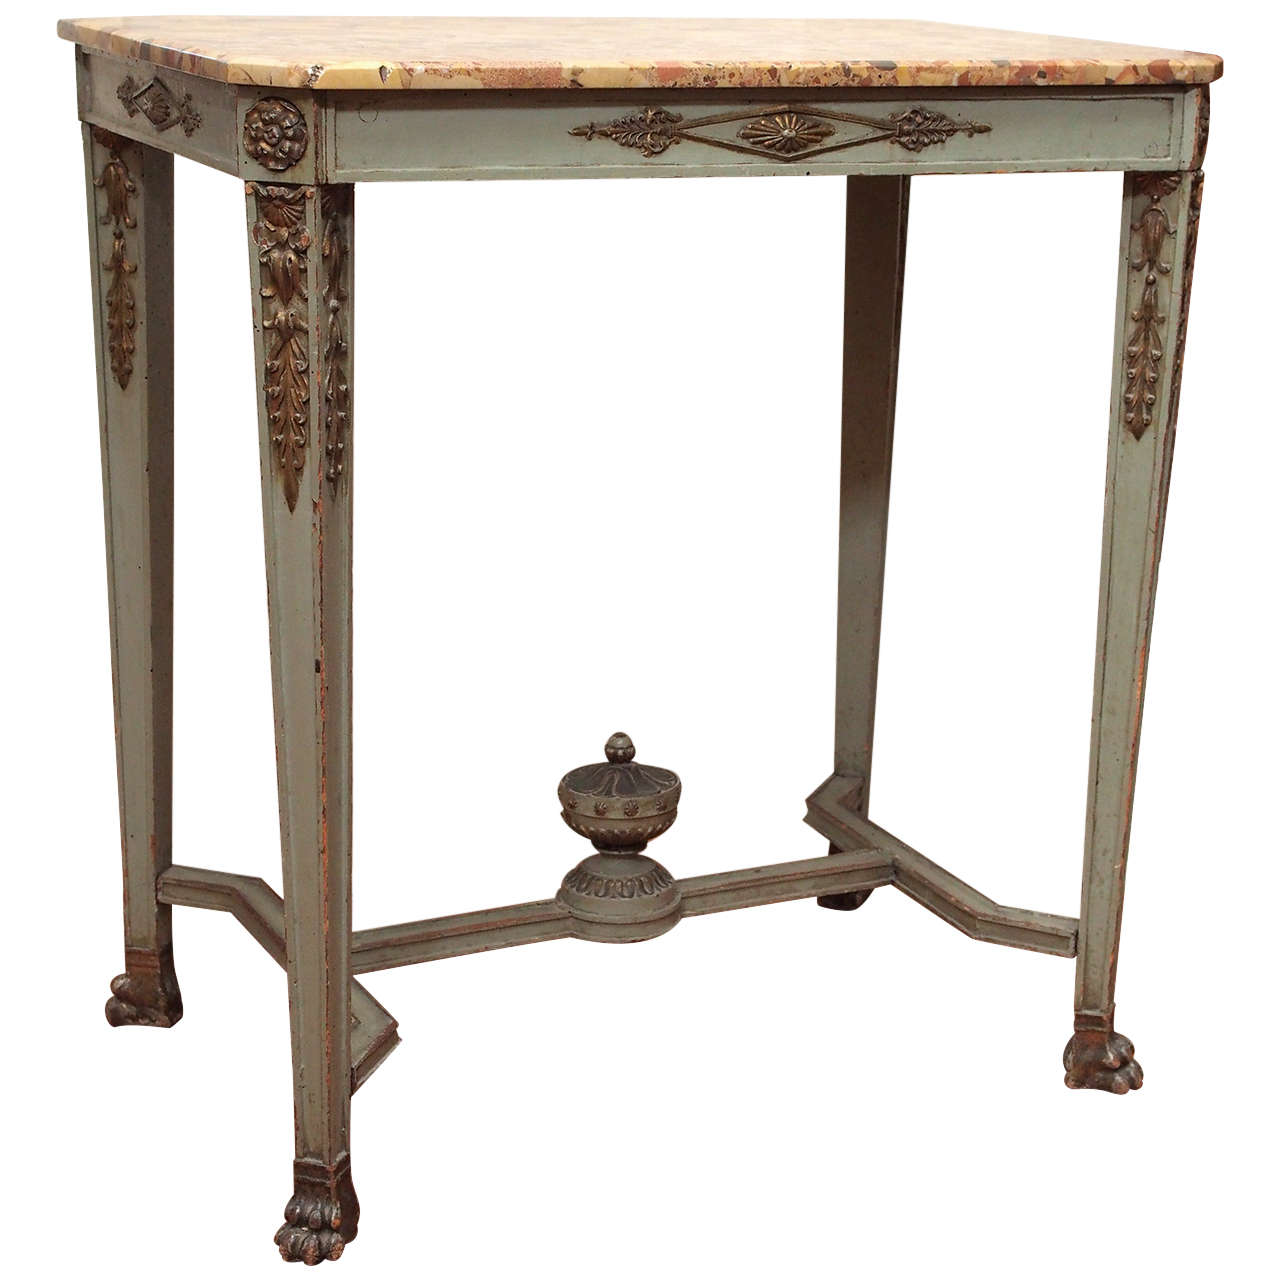 Fine, Period French Neoclassical Table For Sale